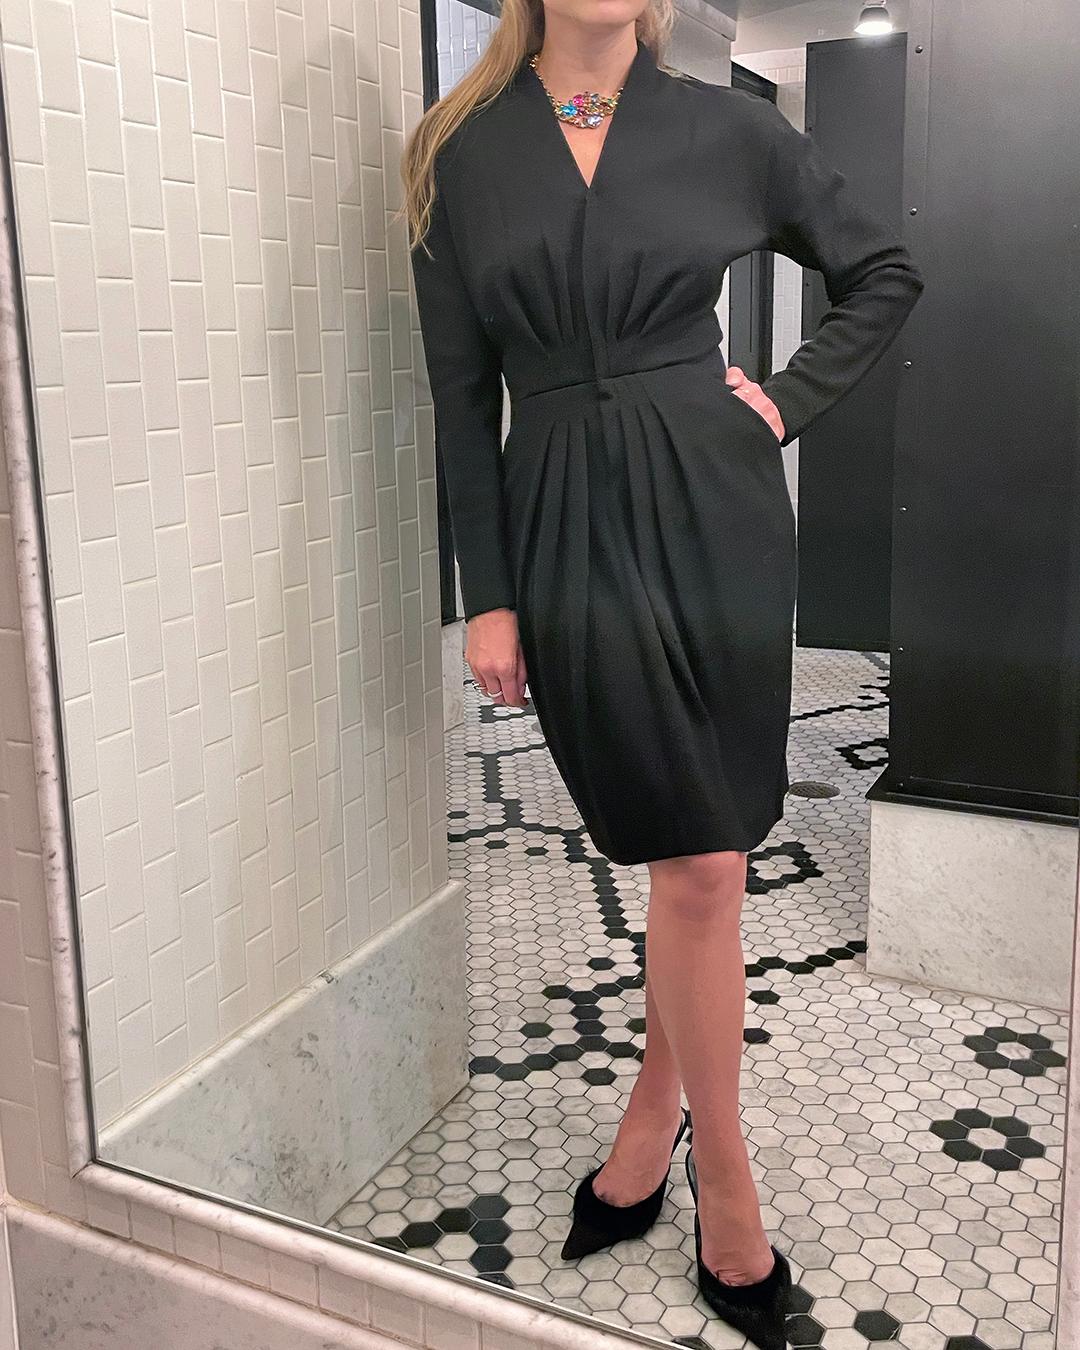 Vintage 1980s Donna Karan Wool Dress: This is such an absolutely timeless vintage little black dress, made by Donna Karan in the late 1980s. The quality and craftsmanship are so evident: Karan was known for her draping and this dress is a prime